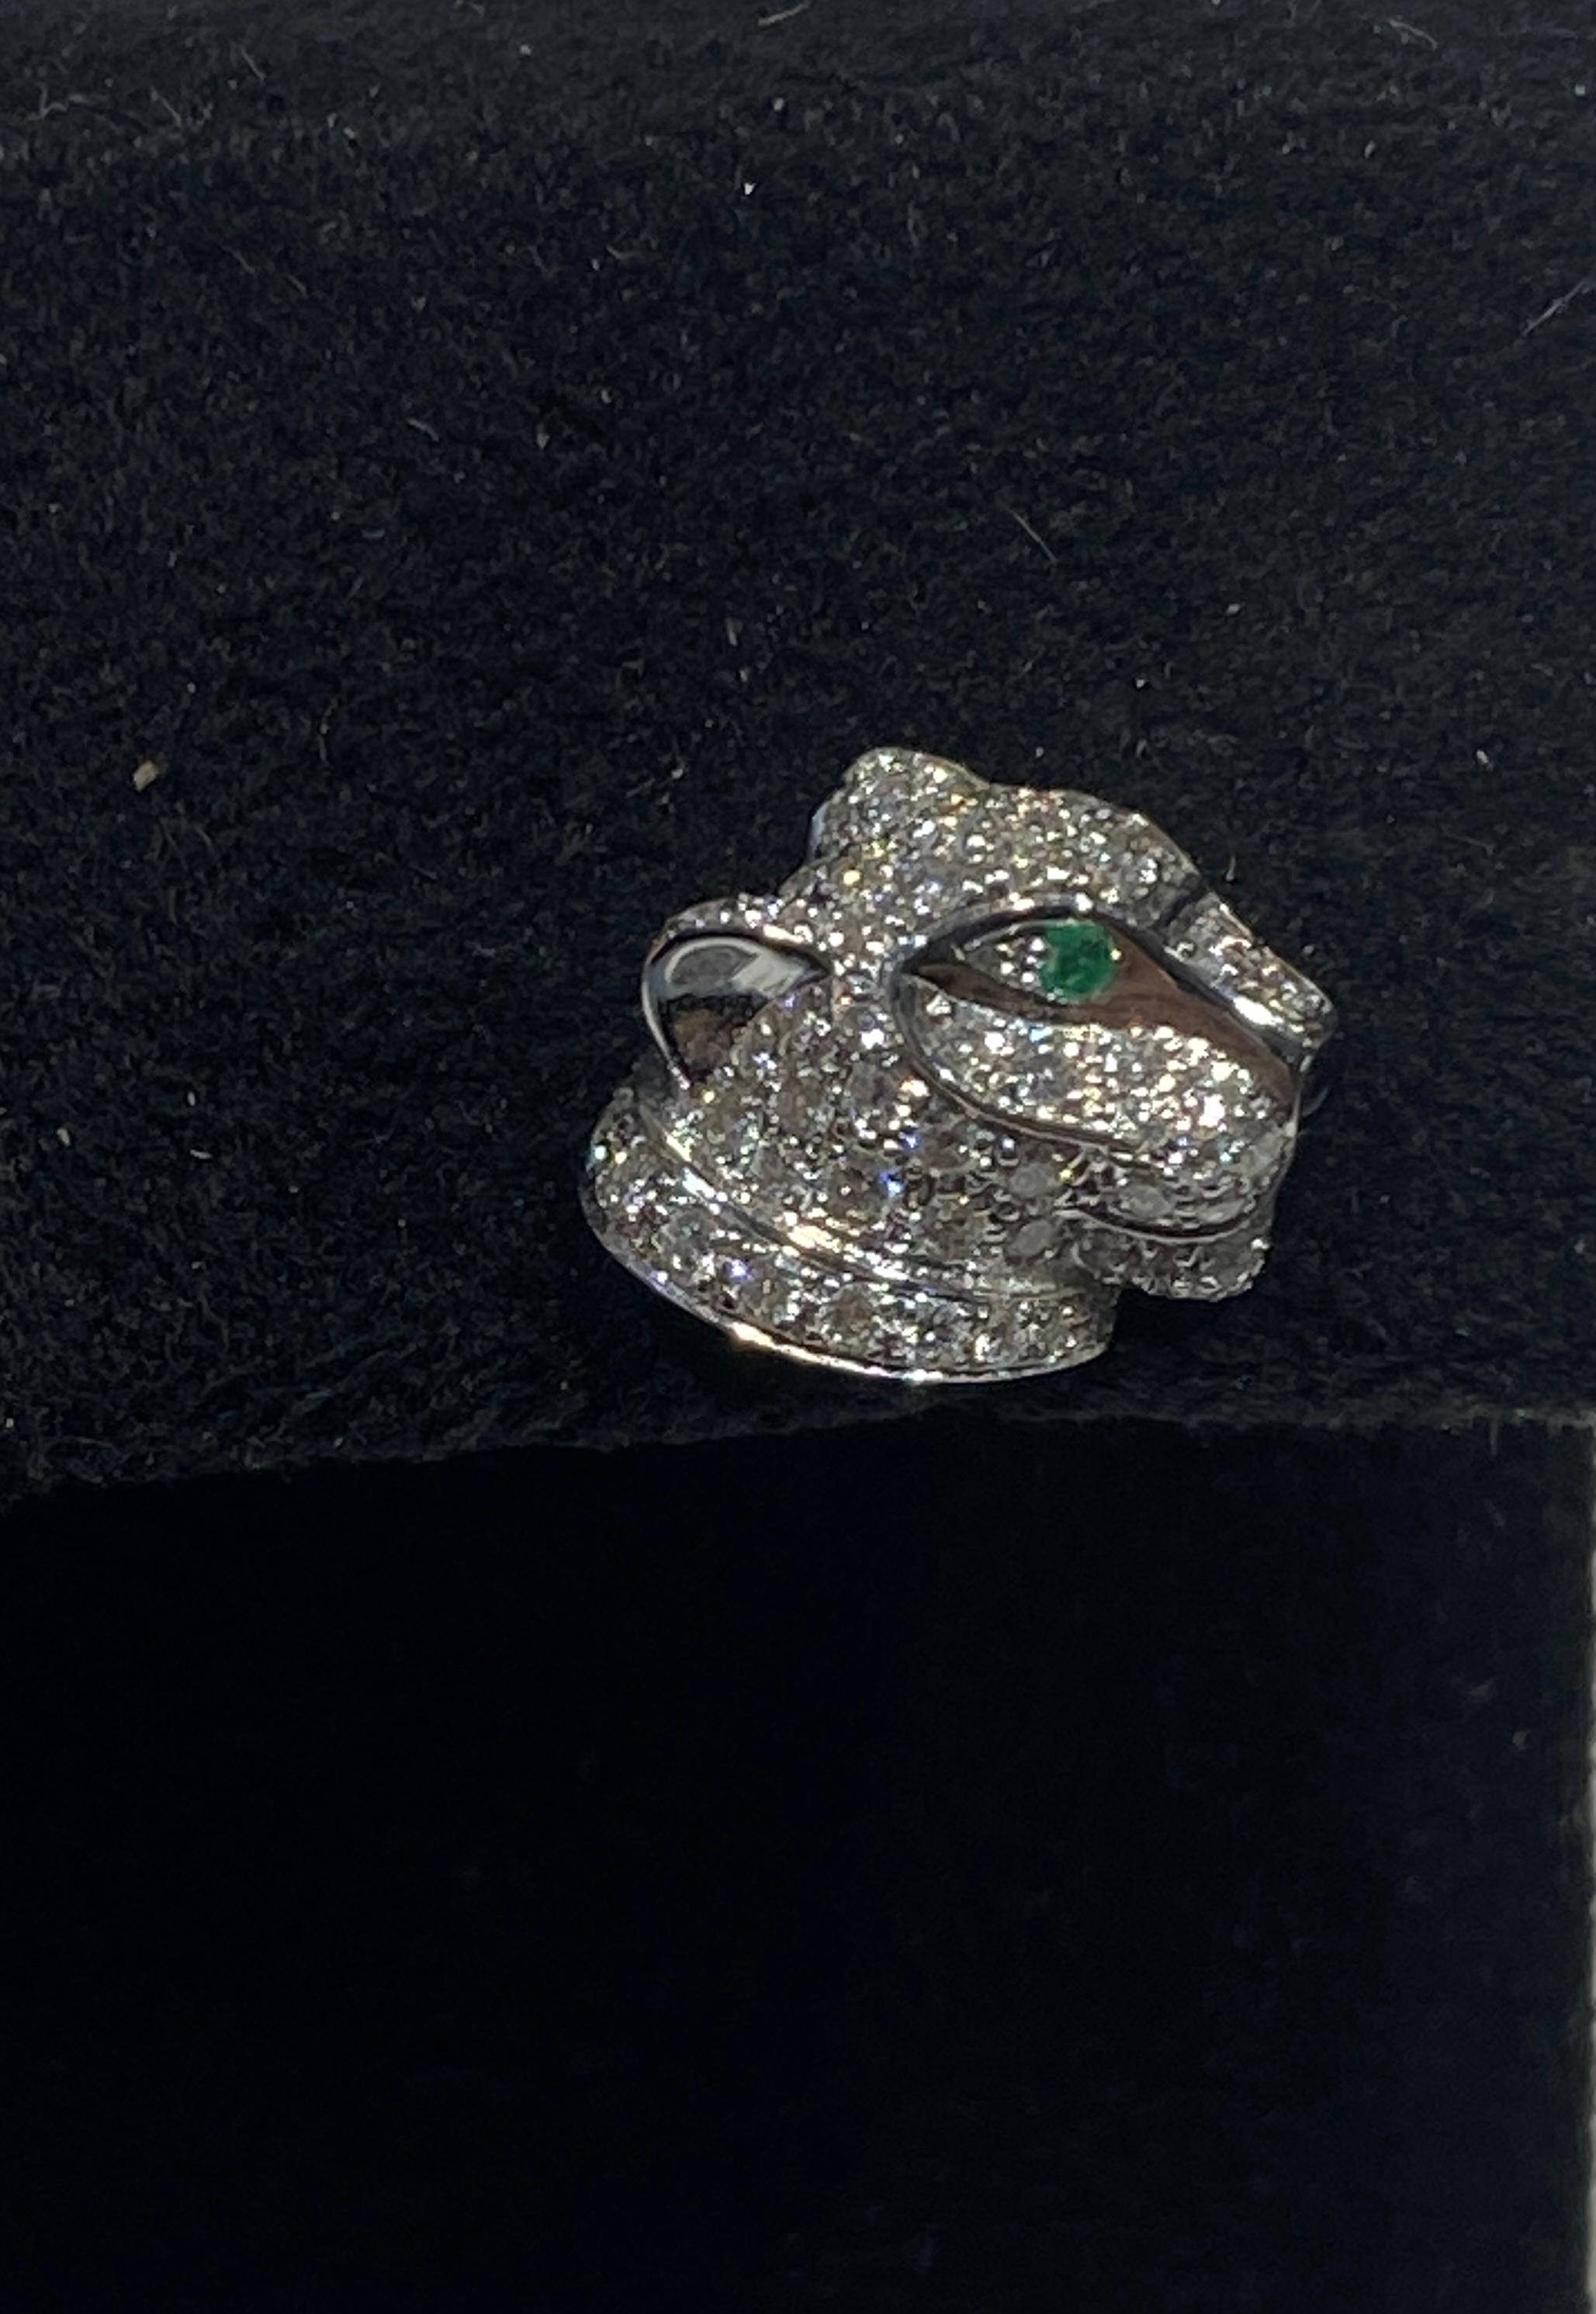 Panthère de Cartier earrings, 18K white gold (750/1000), black lacquer, set with tsavorite garnets, onyx, and five brilliant-cut diamonds totaling 0.01 carat

These earrings are engraved/stamped with the Cartier logo and UL 8218.
Measurements are